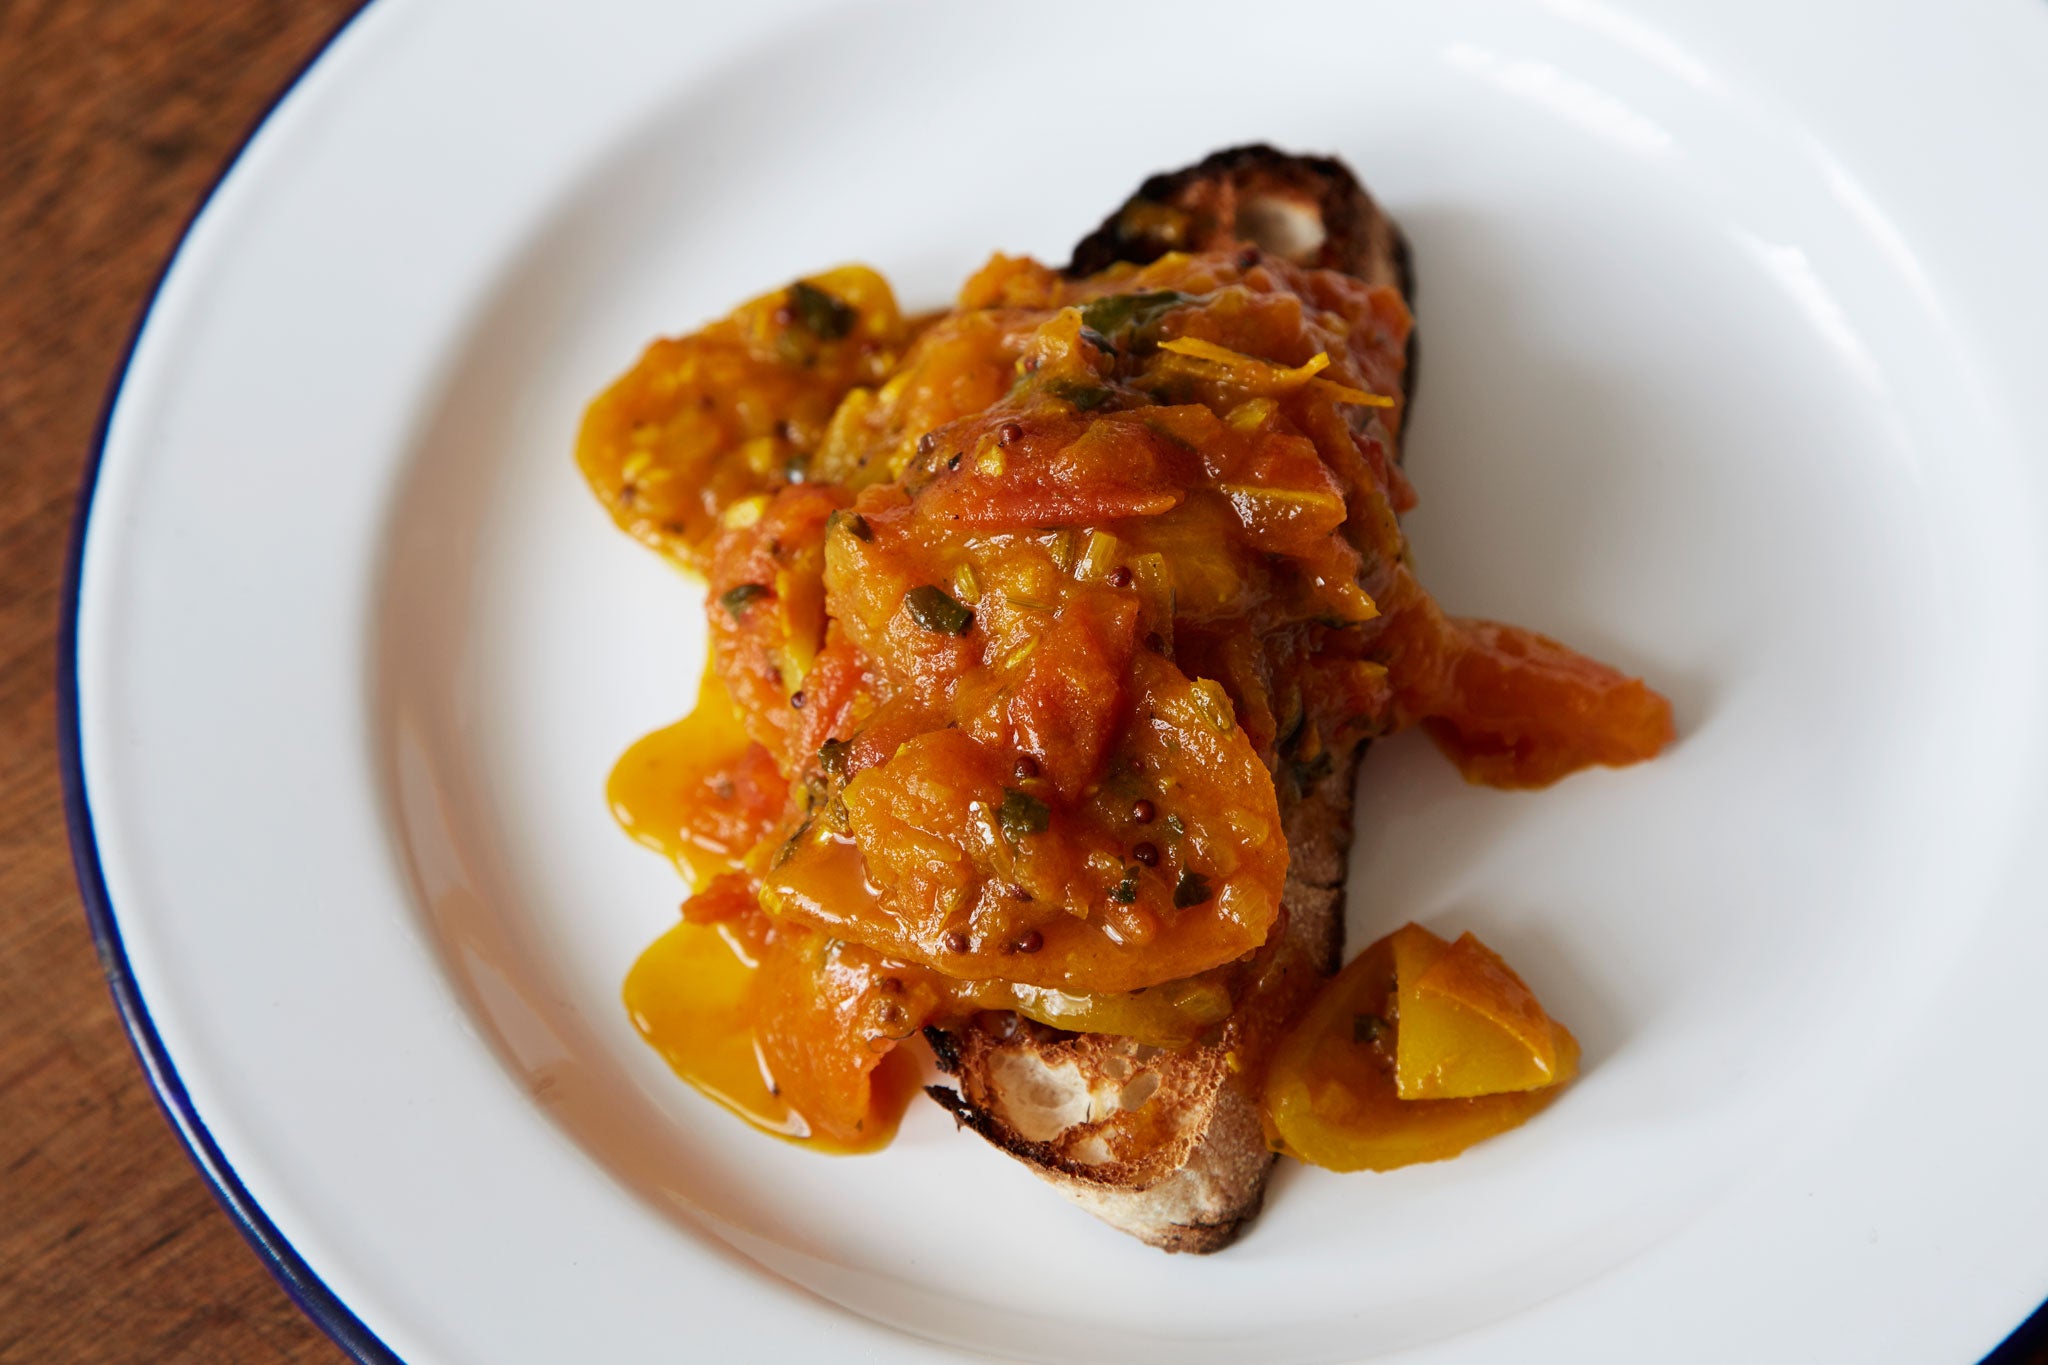 Curried tomatoes on toast will certainly wake you up when you have an early weekend brunch